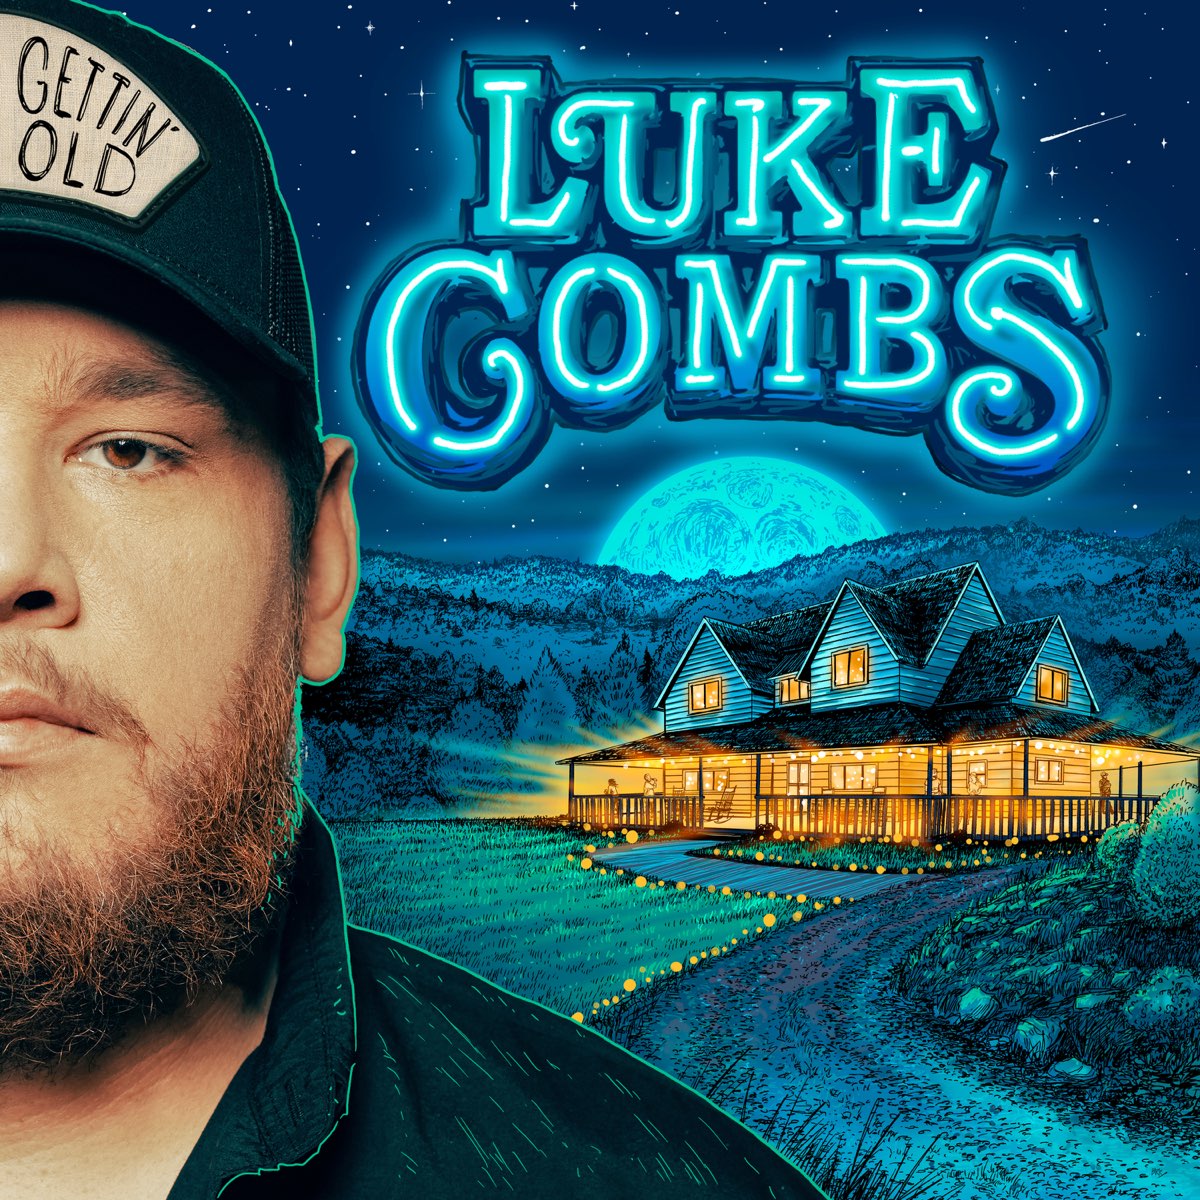 Art for Fast Car by Luke Combs